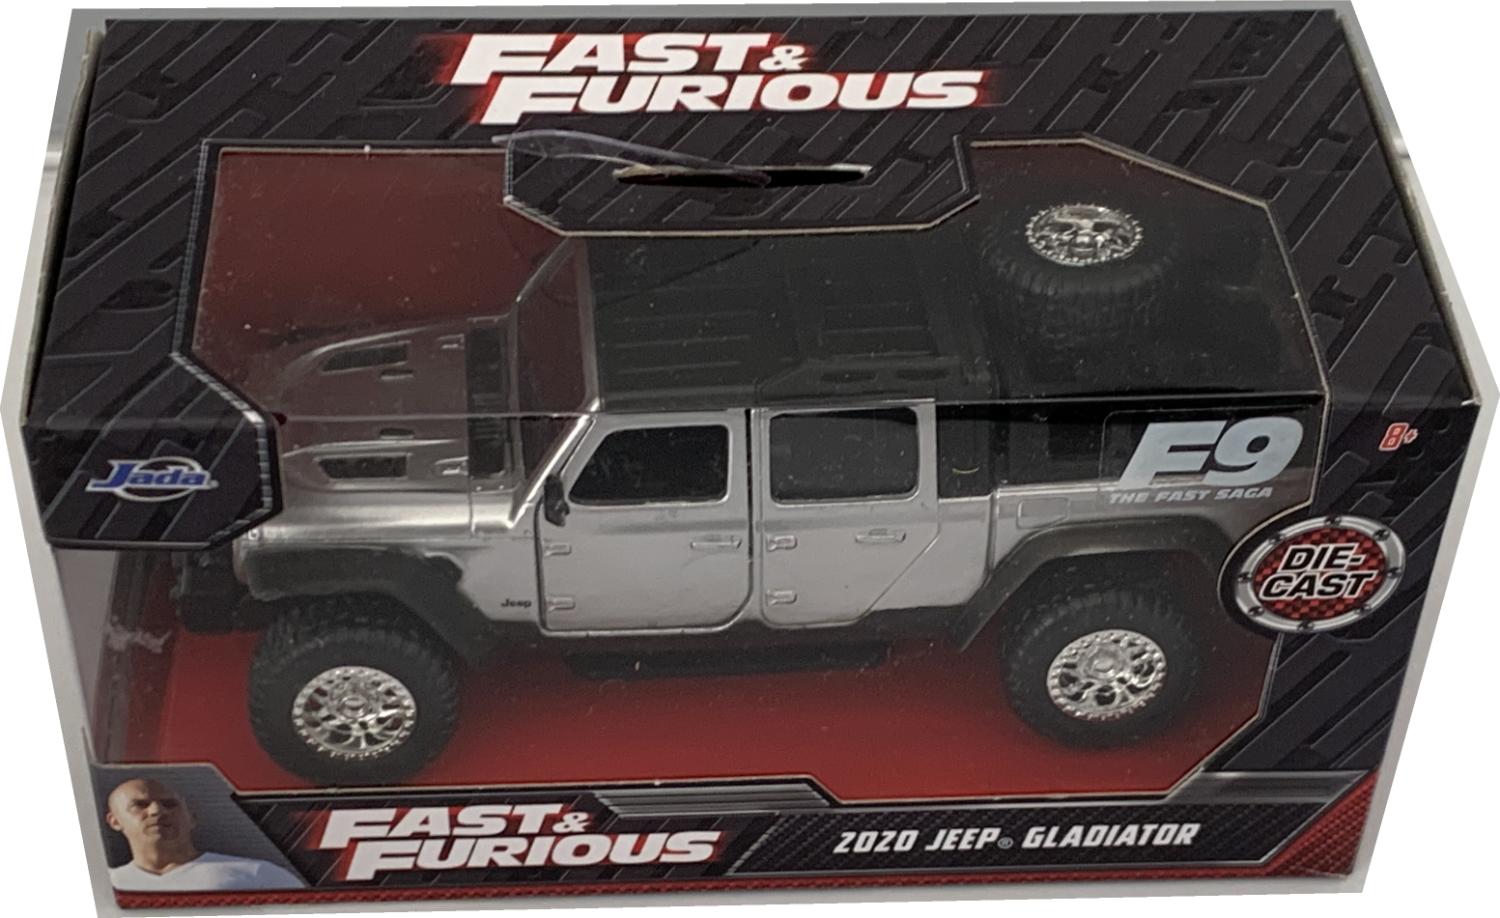 Fast and Furious 9 Tej Parker Jeep Gladiator 2020 in silver 1:32 scale model from JADA